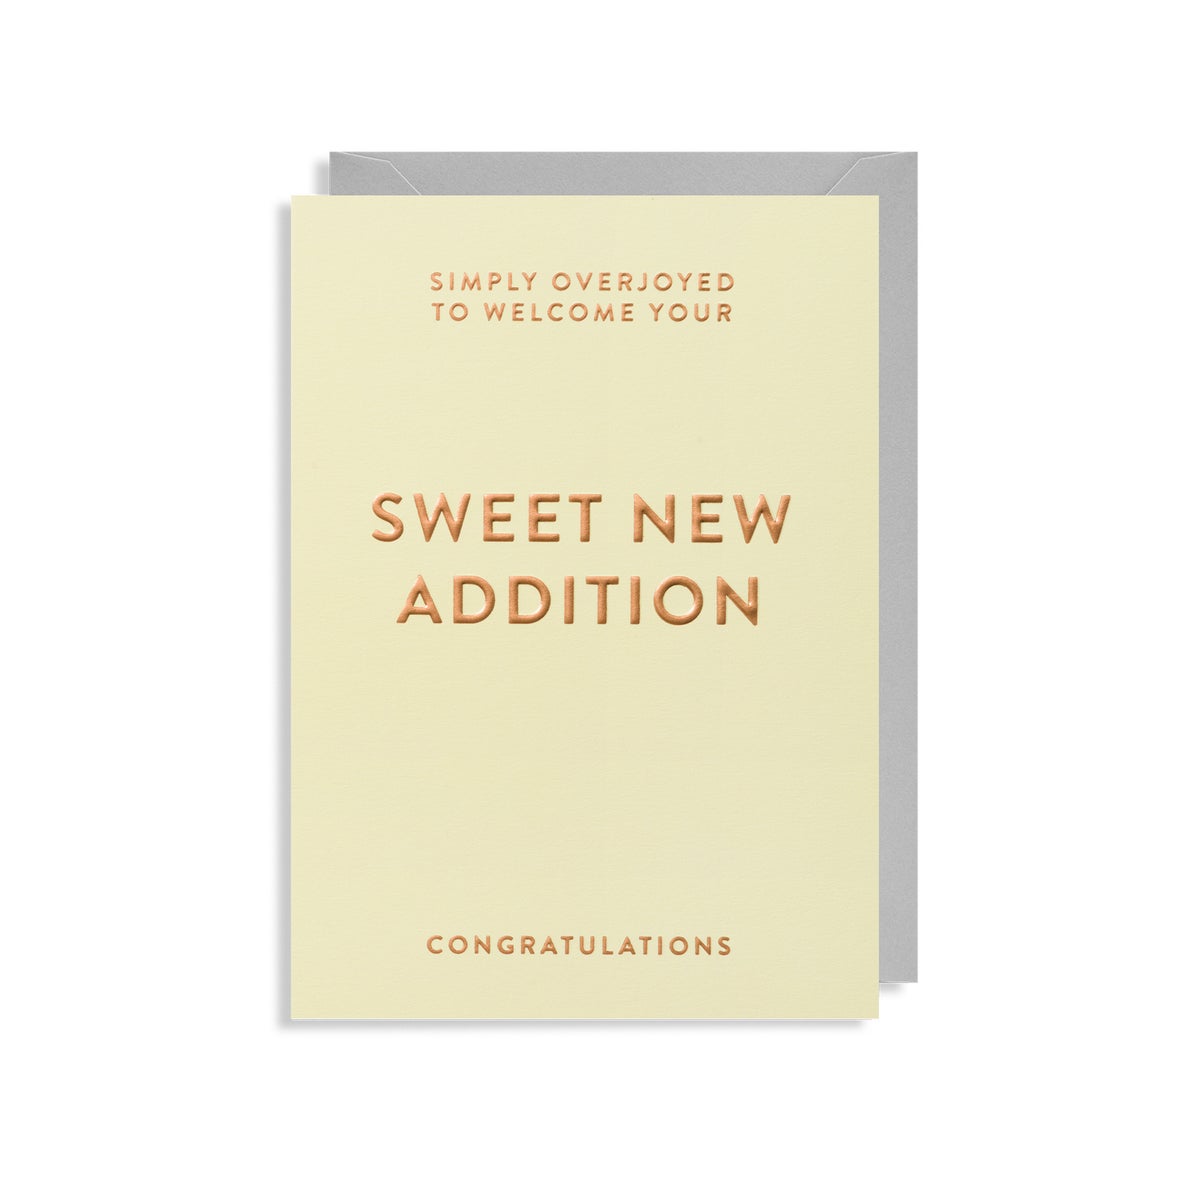 Simply Overjoyed To Welcome Your Sweet New Addition Card